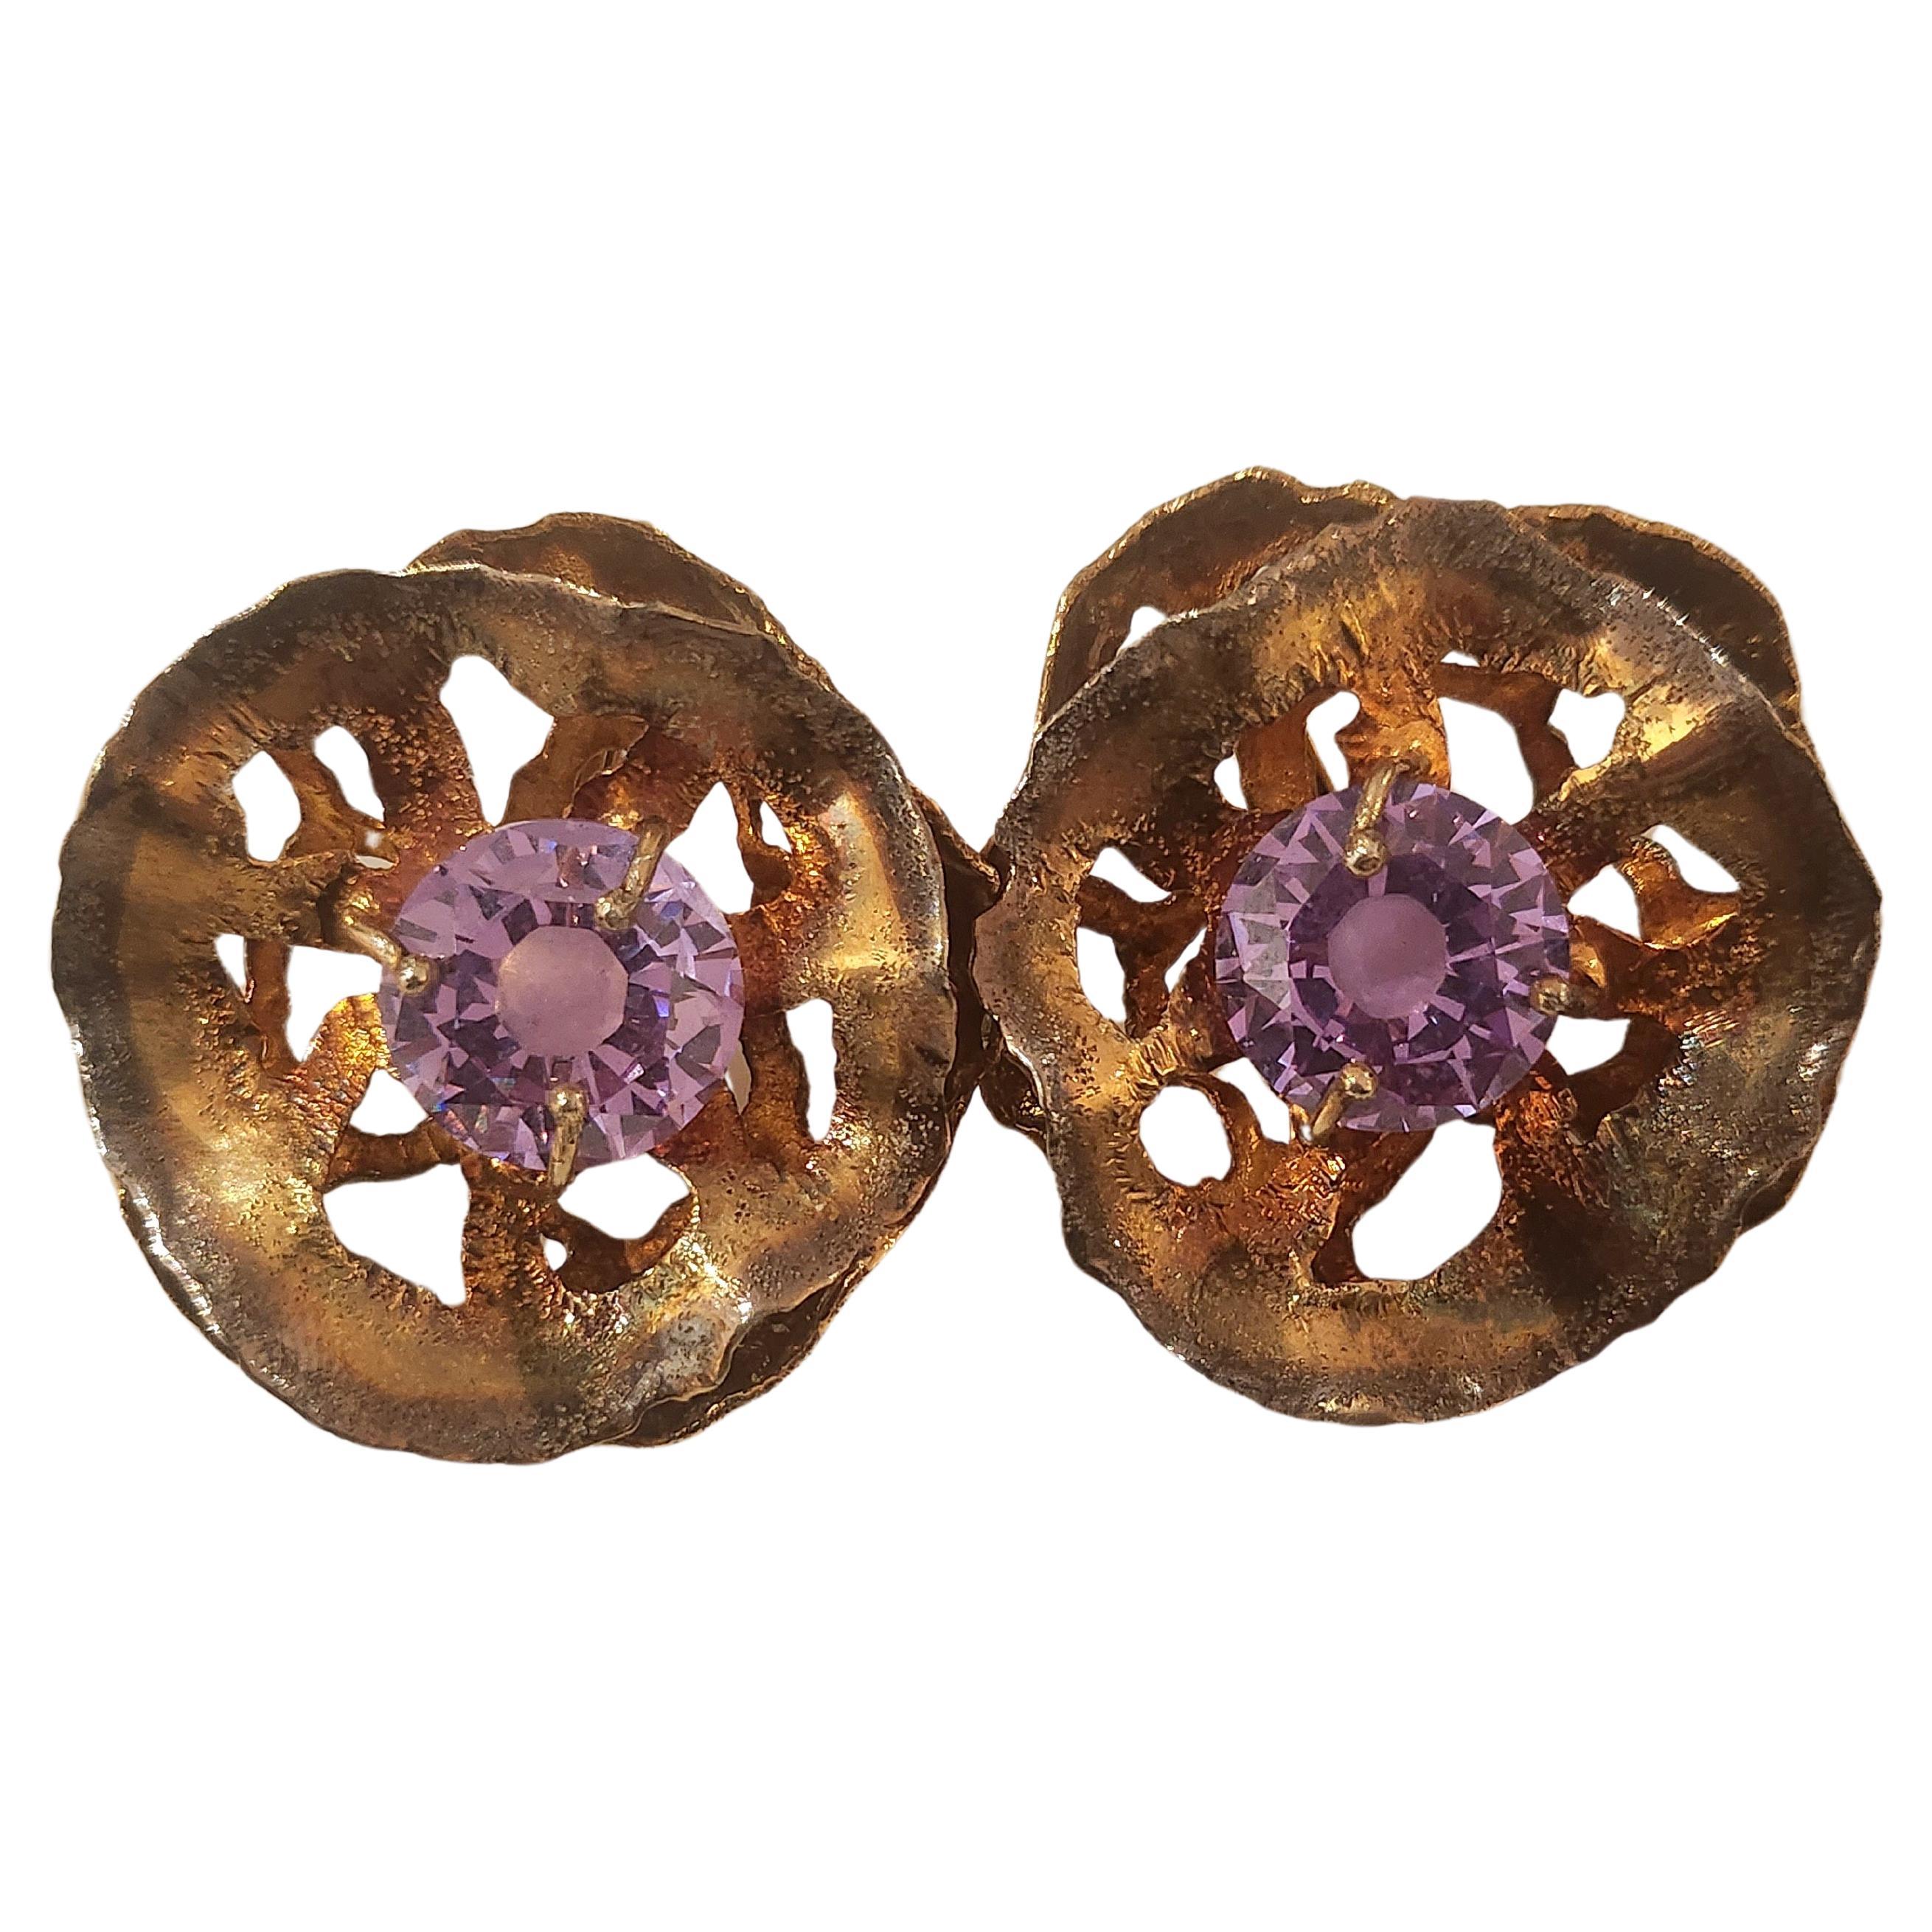 Silver large 925 gold plated with 750k gold finest hand made earrings centered with amethyst stones in floral desgne open work style with total weight of 16 grams